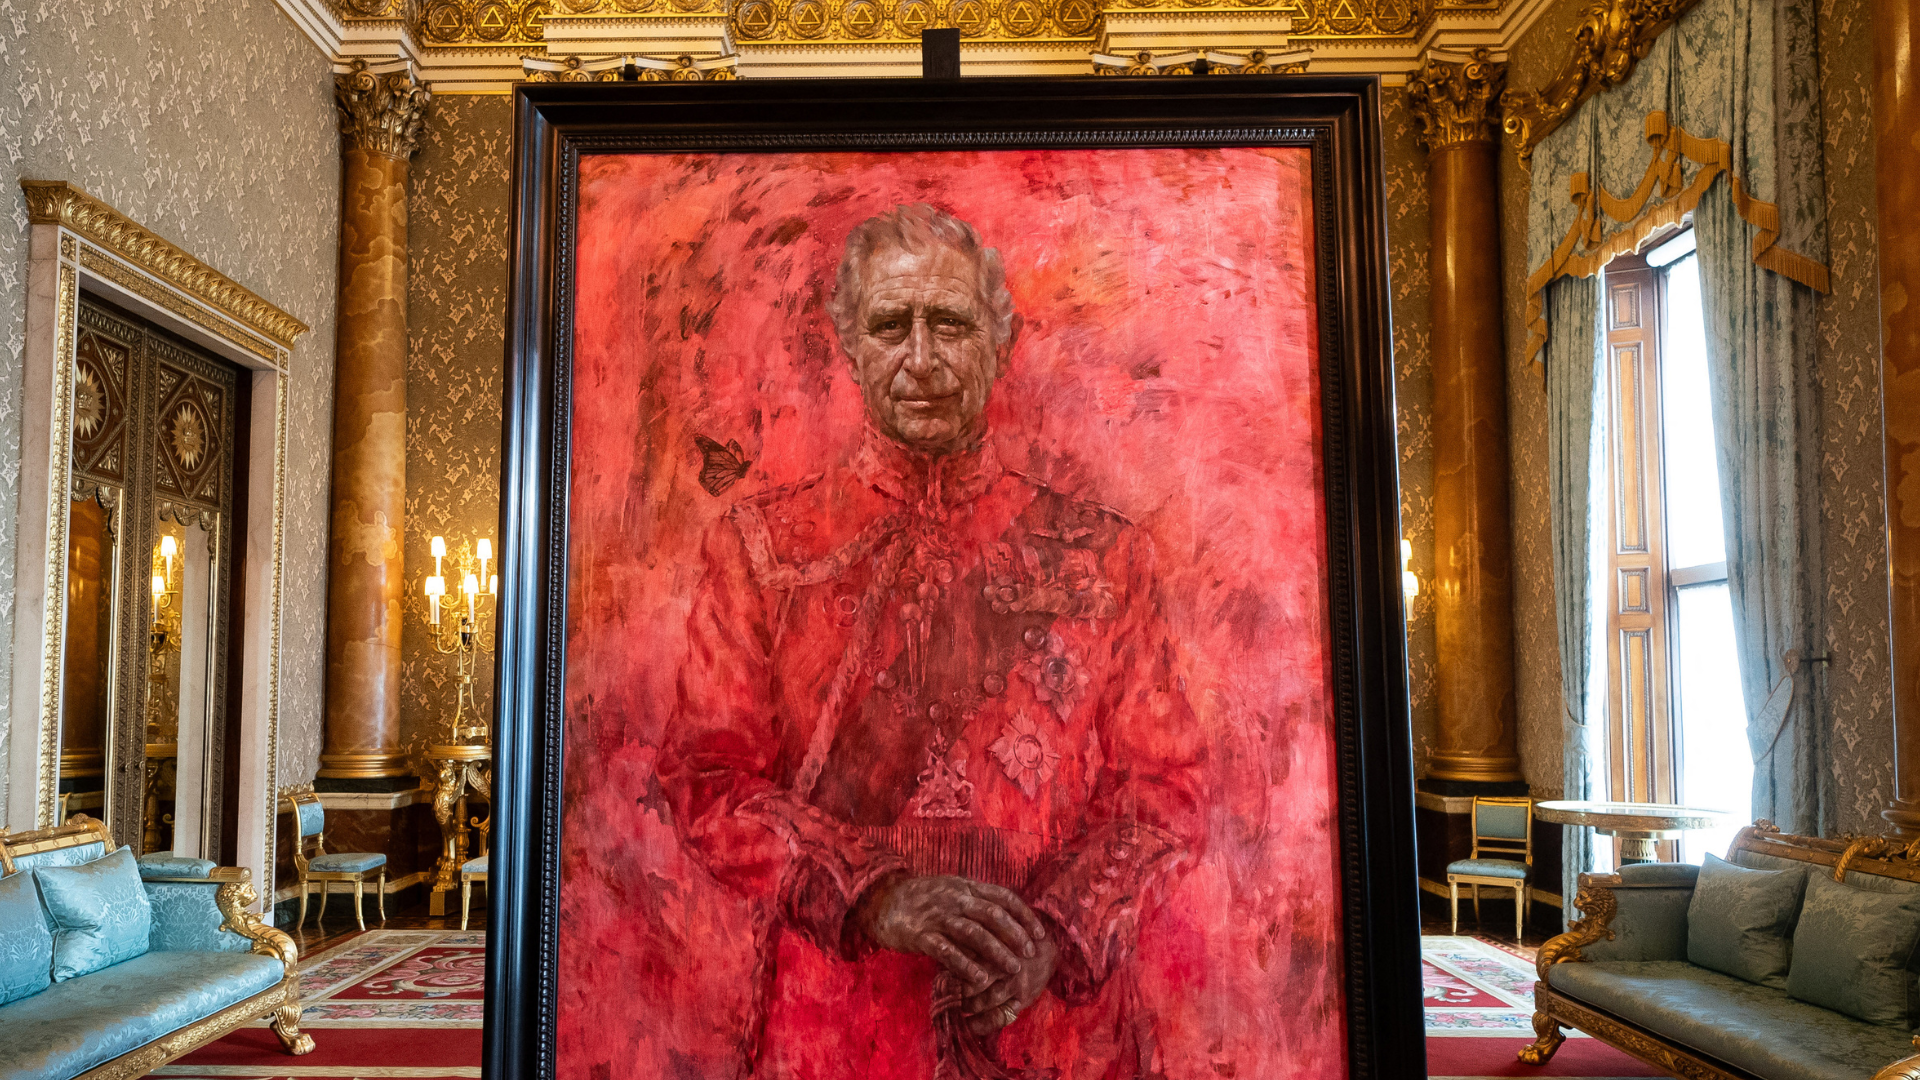 A portrait of King Charles in a black frame. The portrait is mostly red, and a butterfly is about to rest on the King's shoulder.